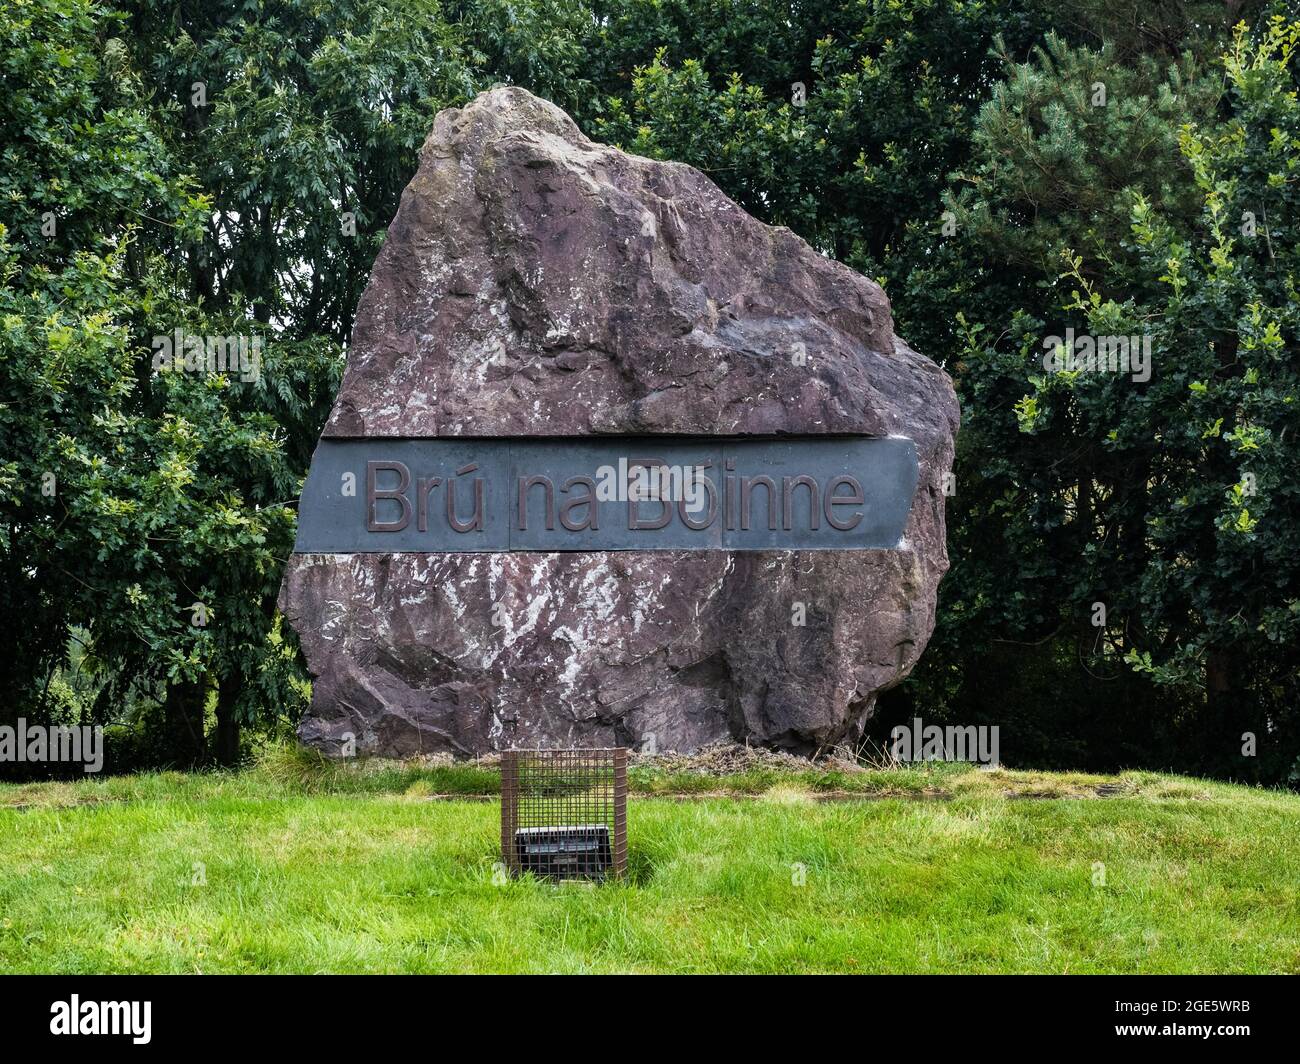 Notice board, historic site with Neolithic passage tomb, burial site, Knowth, Unesco World Heritage Site, Bru na Boinne, Donore, County Meath, Ireland Stock Photo